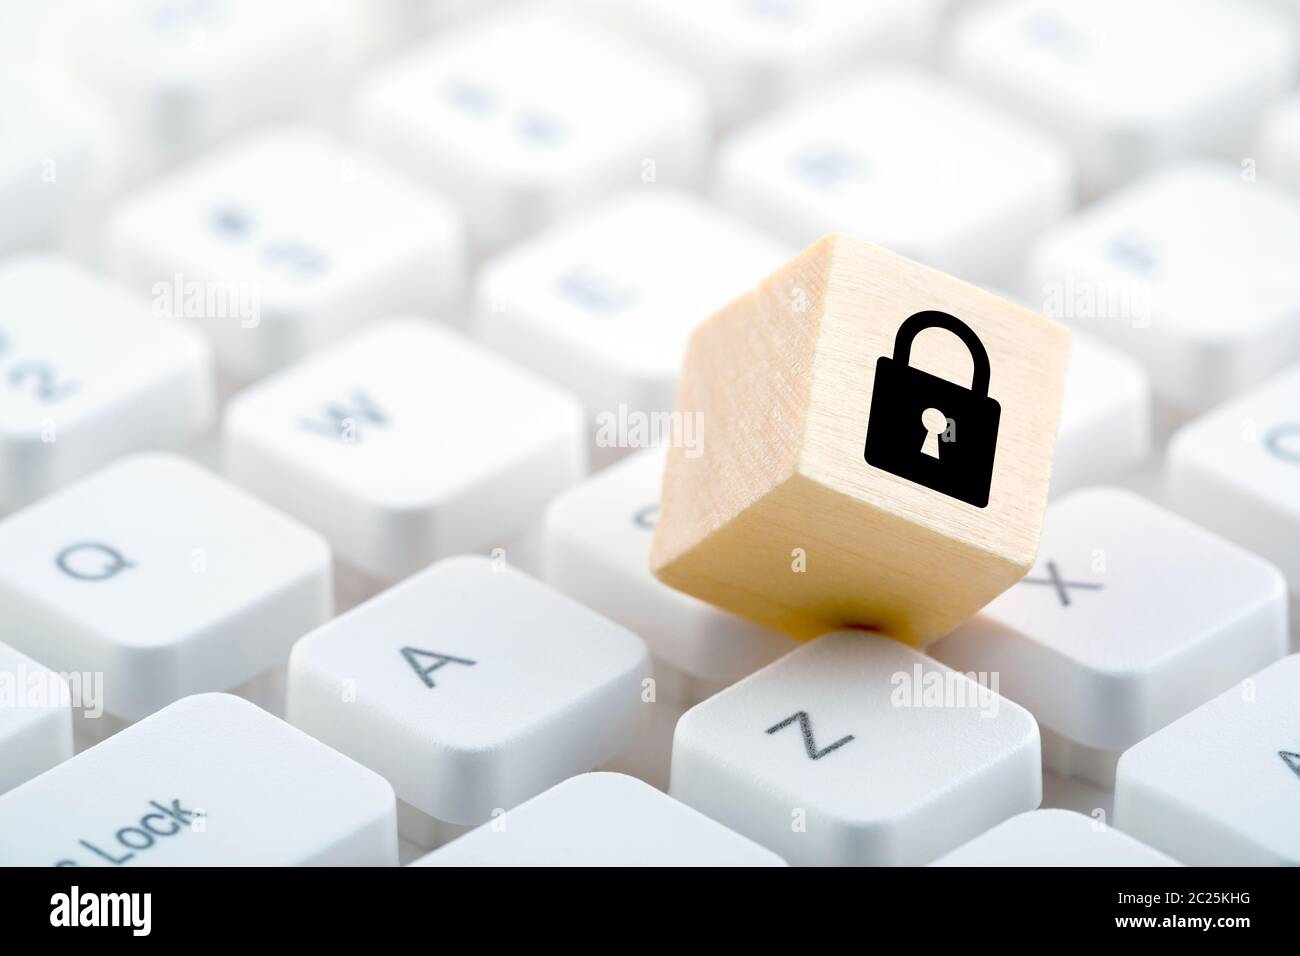 Wooden block with lock graphic on computer keyboard. Computer security concept. Stock Photo